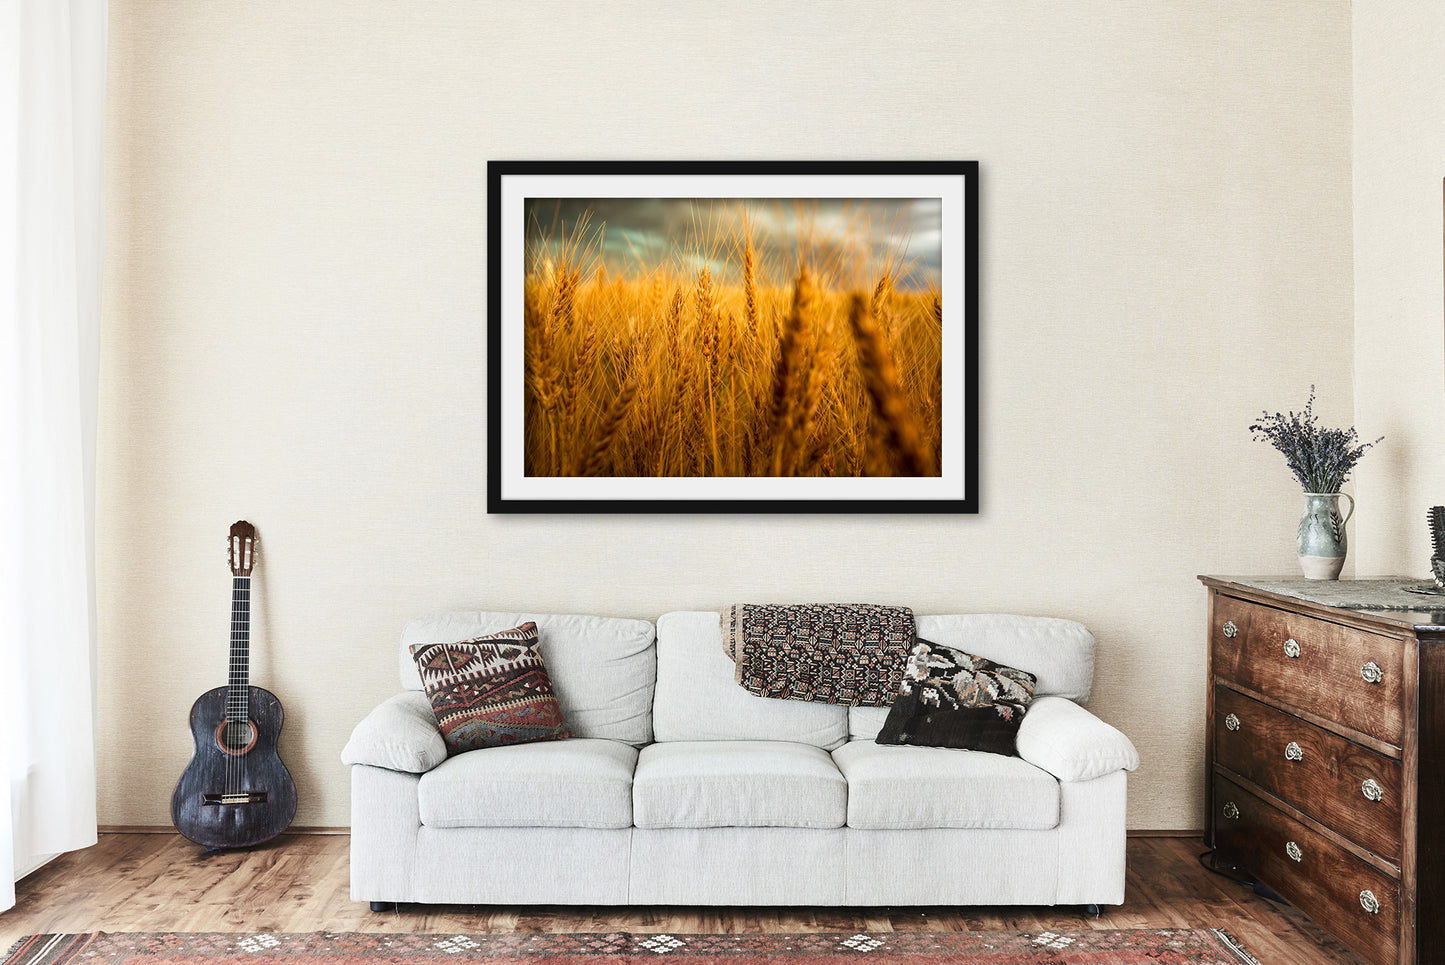 Golden Wheat Field Framed and Matted Print | Farm Photo | Country Decor | Colorado Photography | Farmhouse Wall Art | Ready to Hang